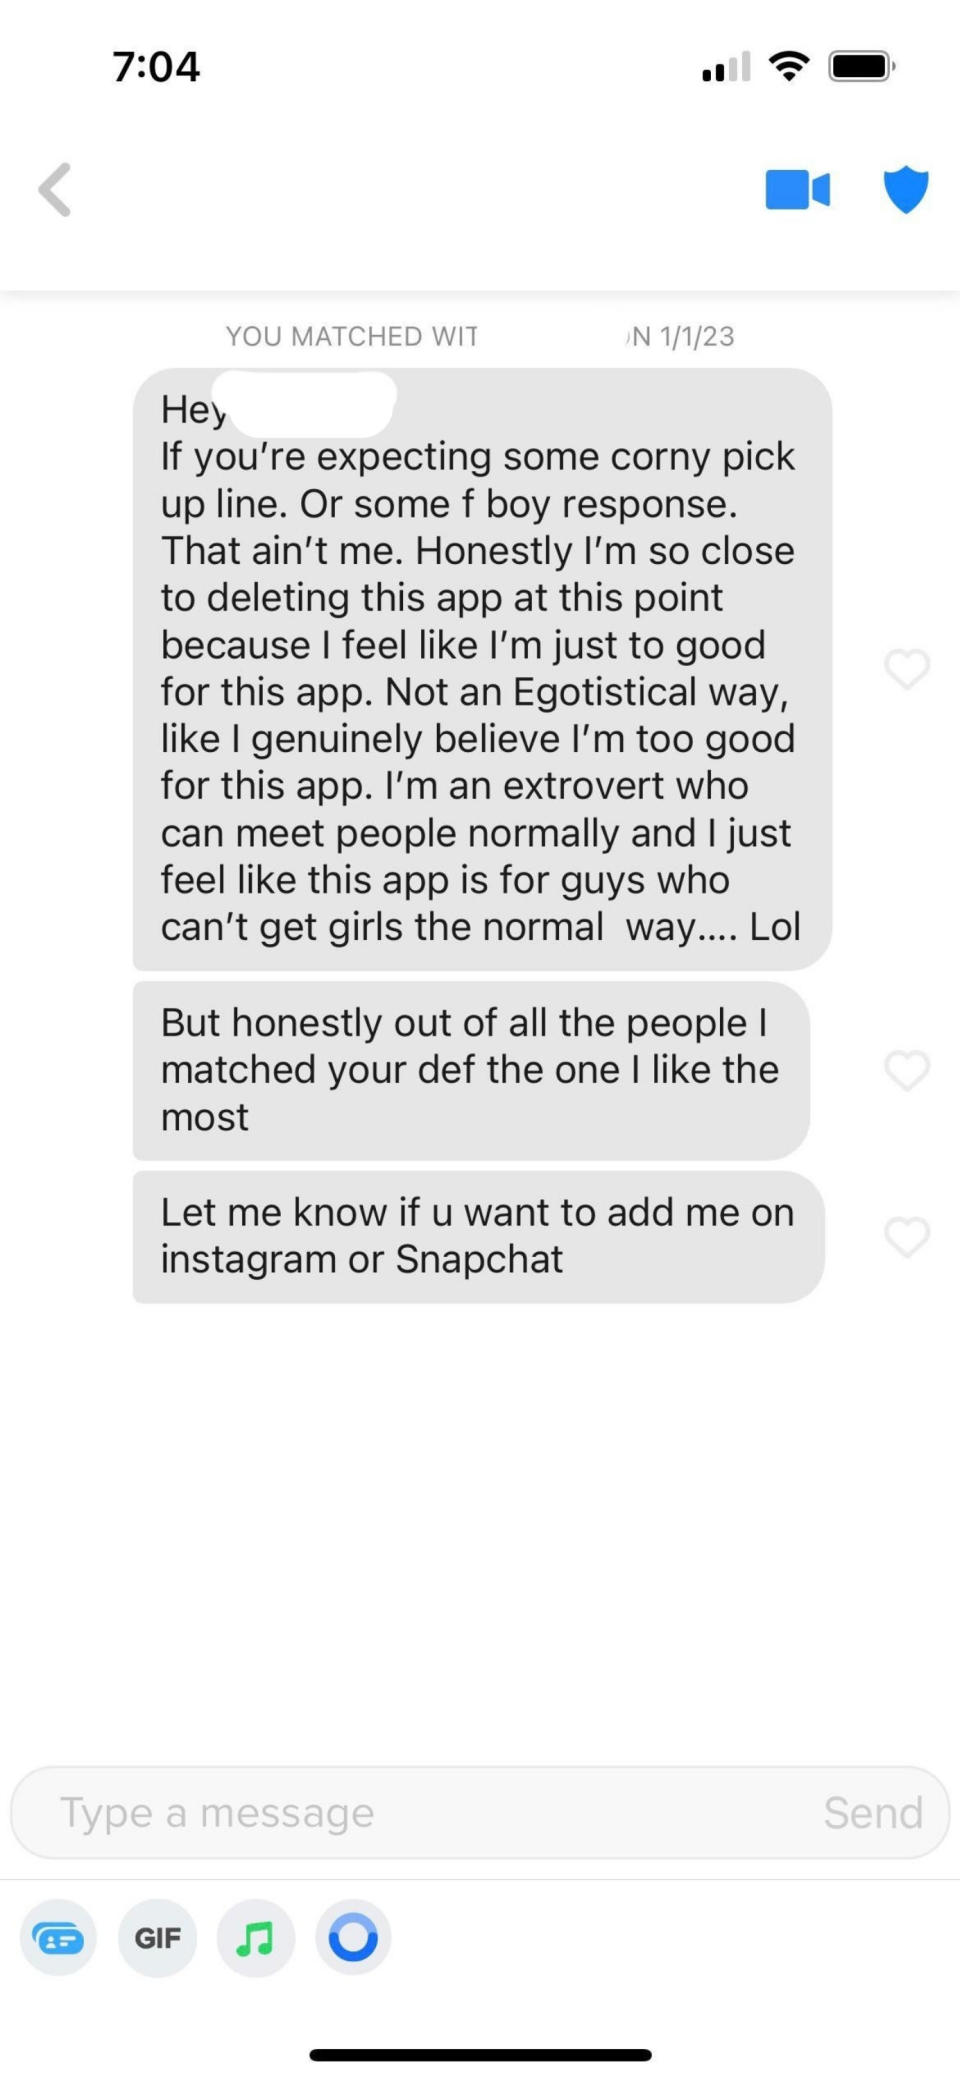 He says he's close to deleting the app because he's too good for it: he's "an extrovert who can meet people the normal way" but out of everyone he matched with, she's the one he liked the most